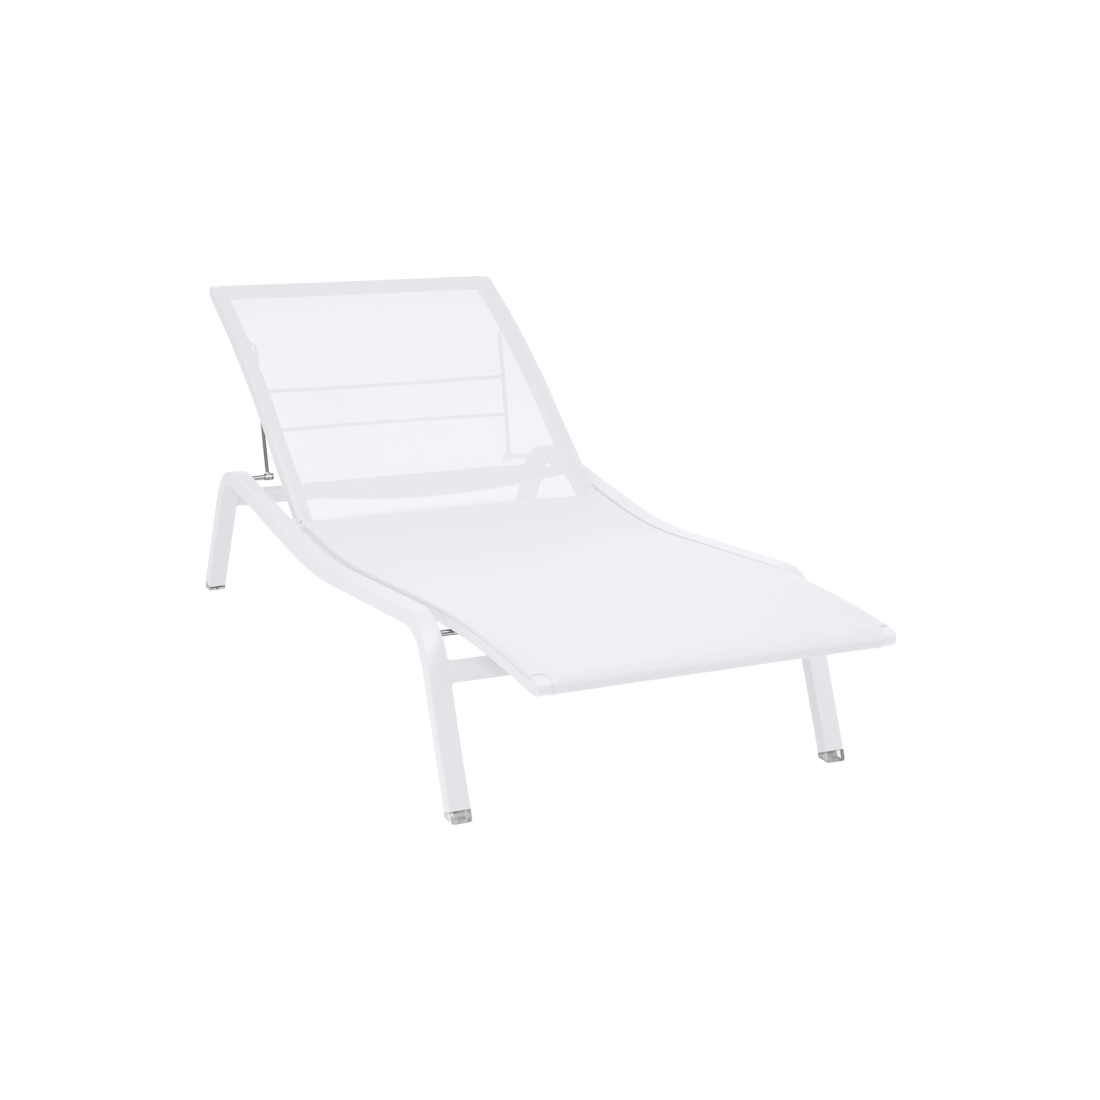 Alize Sunlounger